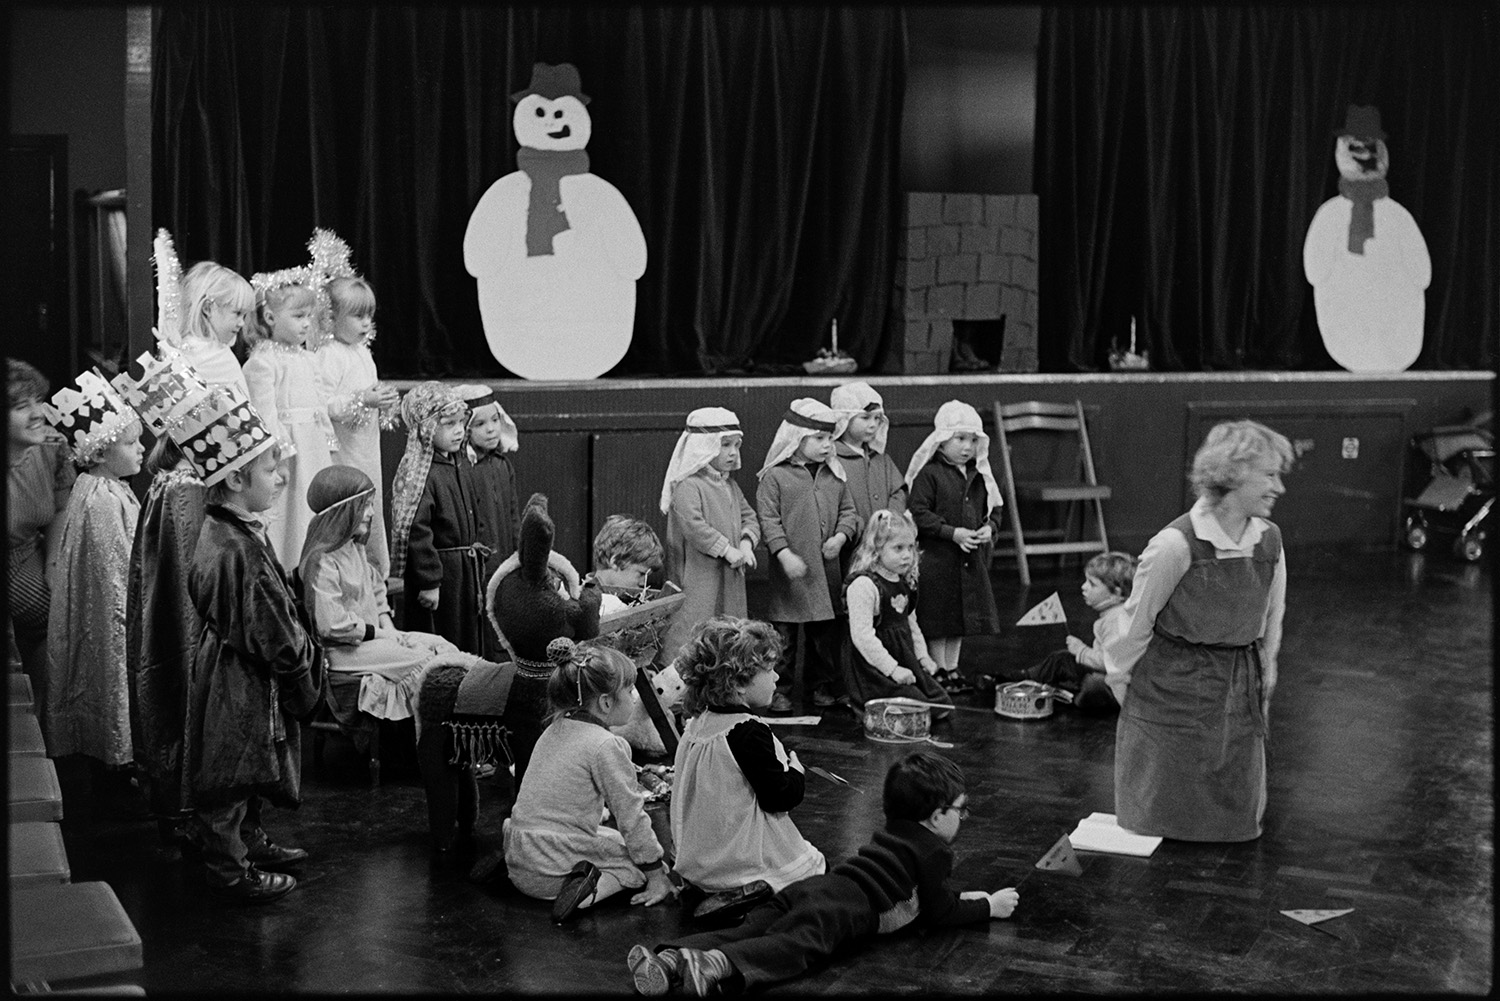 Christmas, children's Nativity play, singing carols.
[Children in costume performing a Christmas Nativity play in Dolton village hall, with snowman models on the stage.]